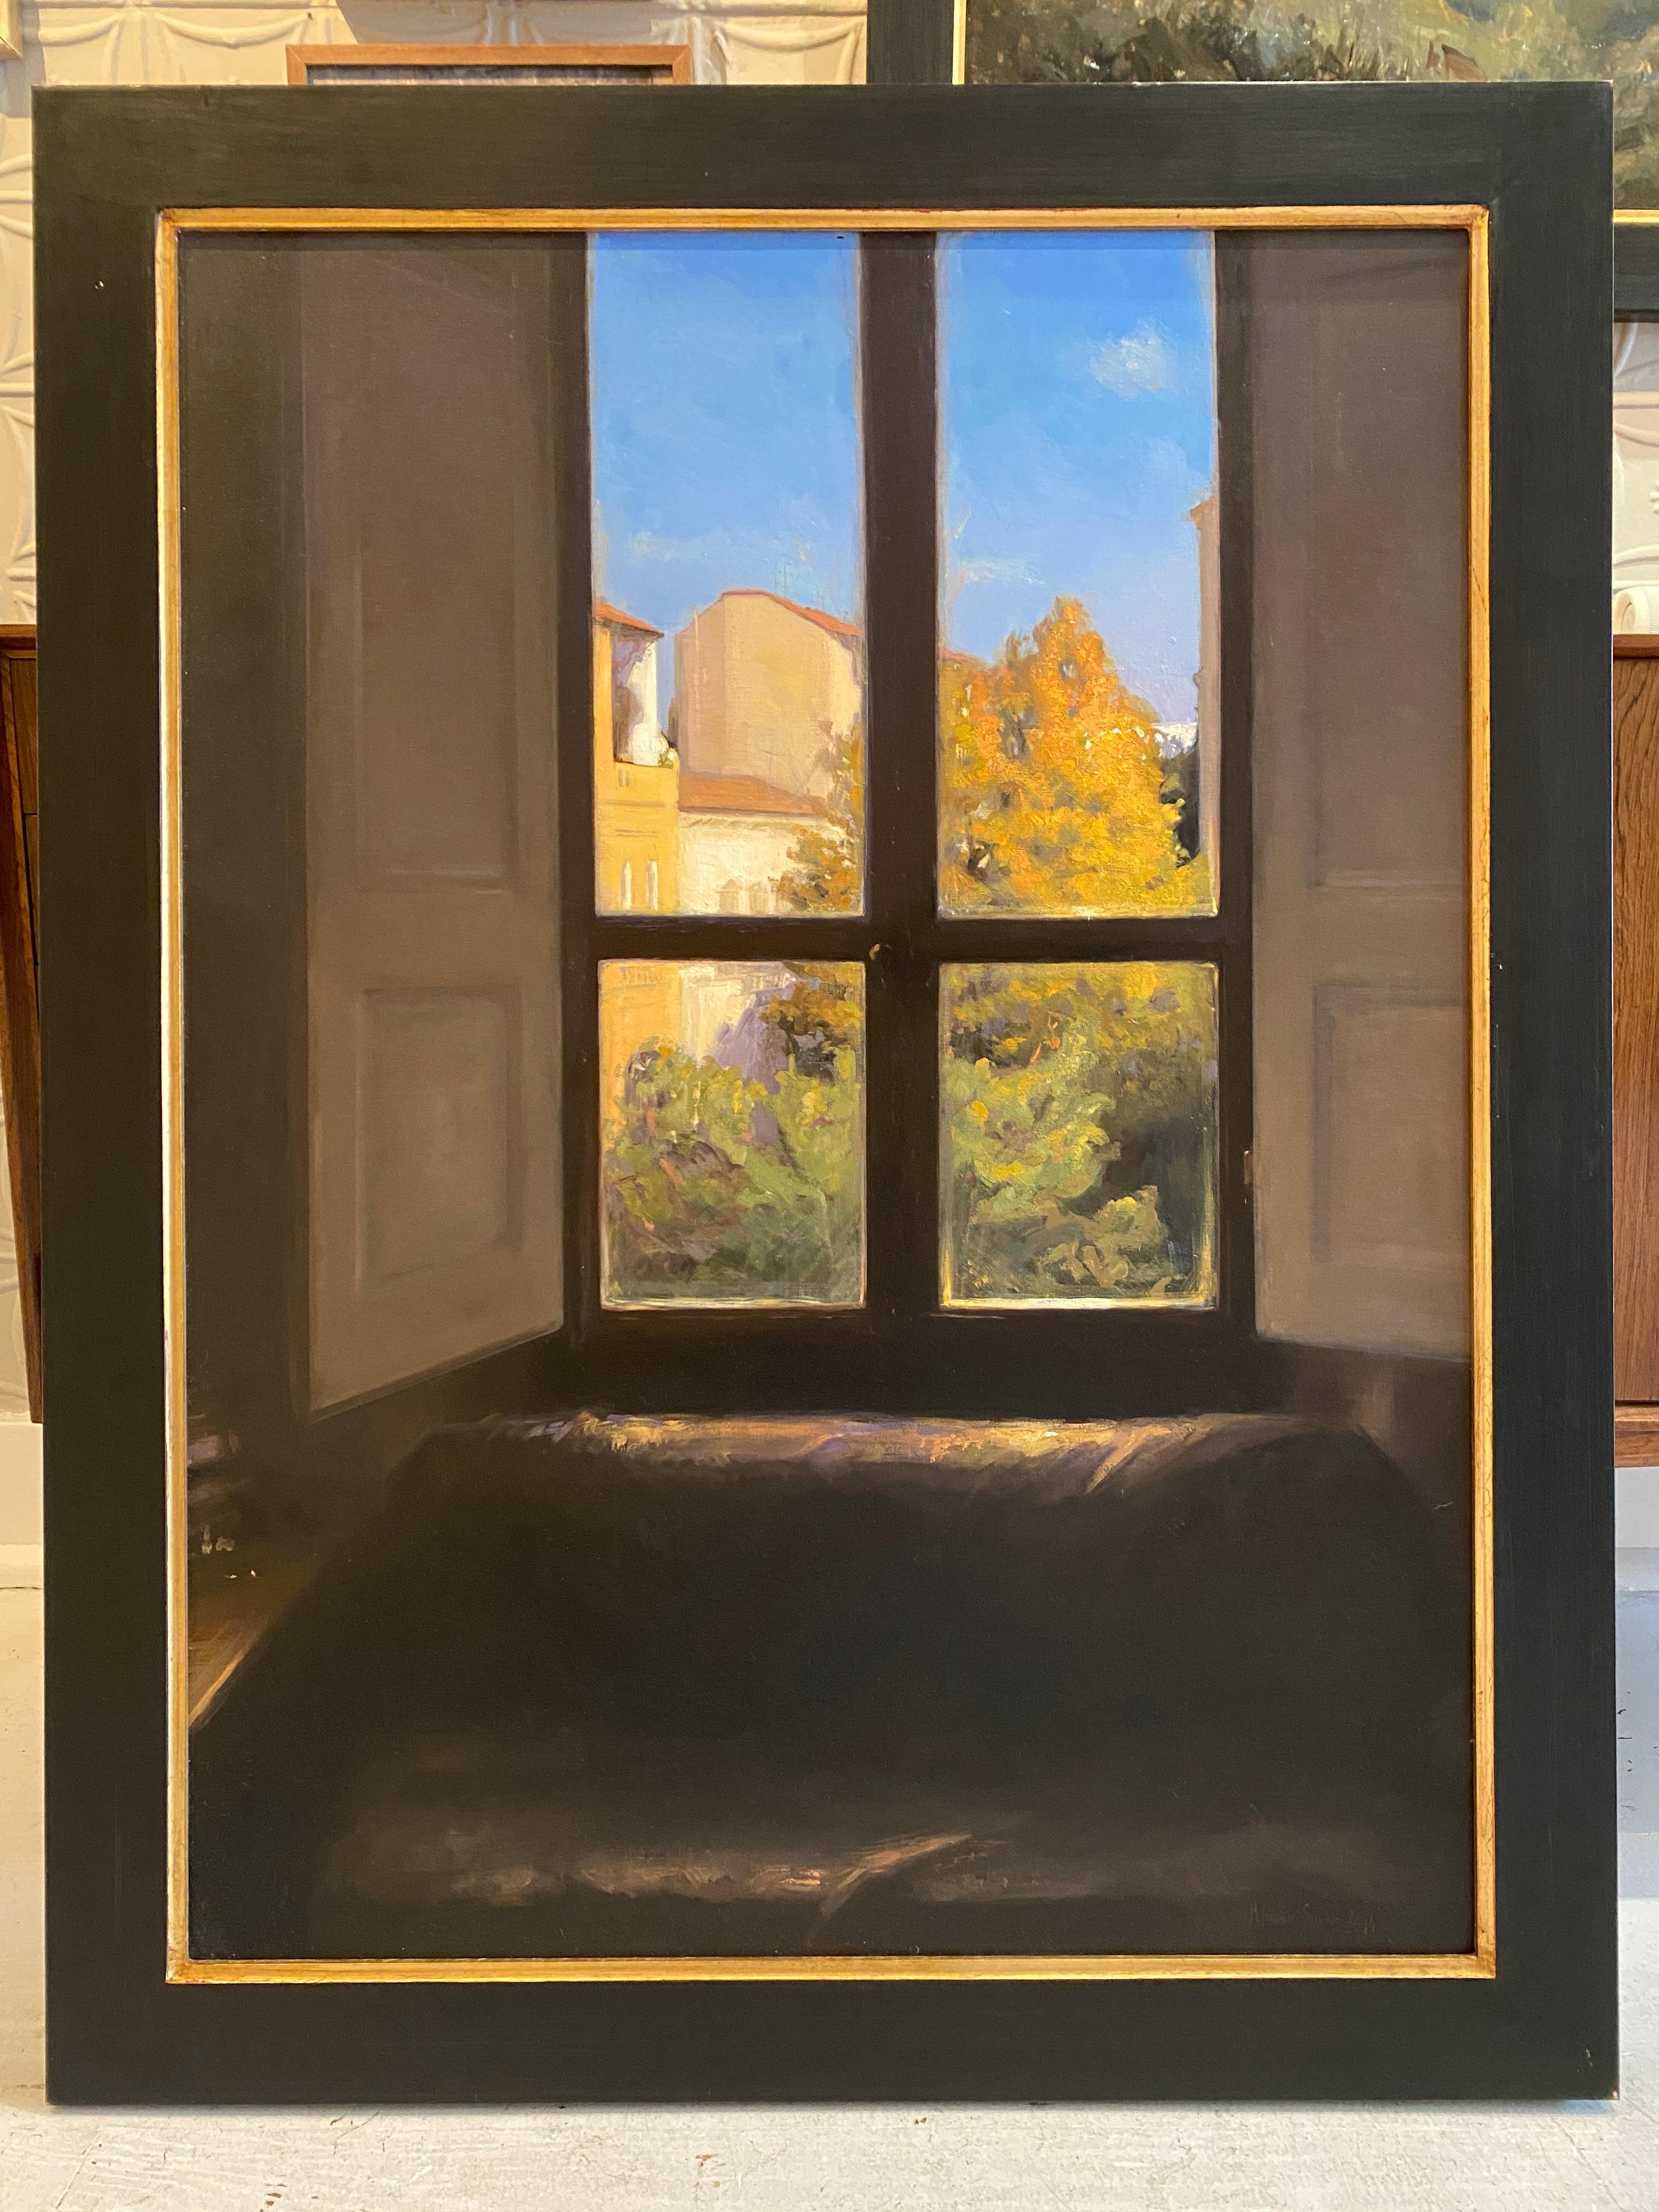 Studio in Fall - Painting by Melissa Franklin Sanchez